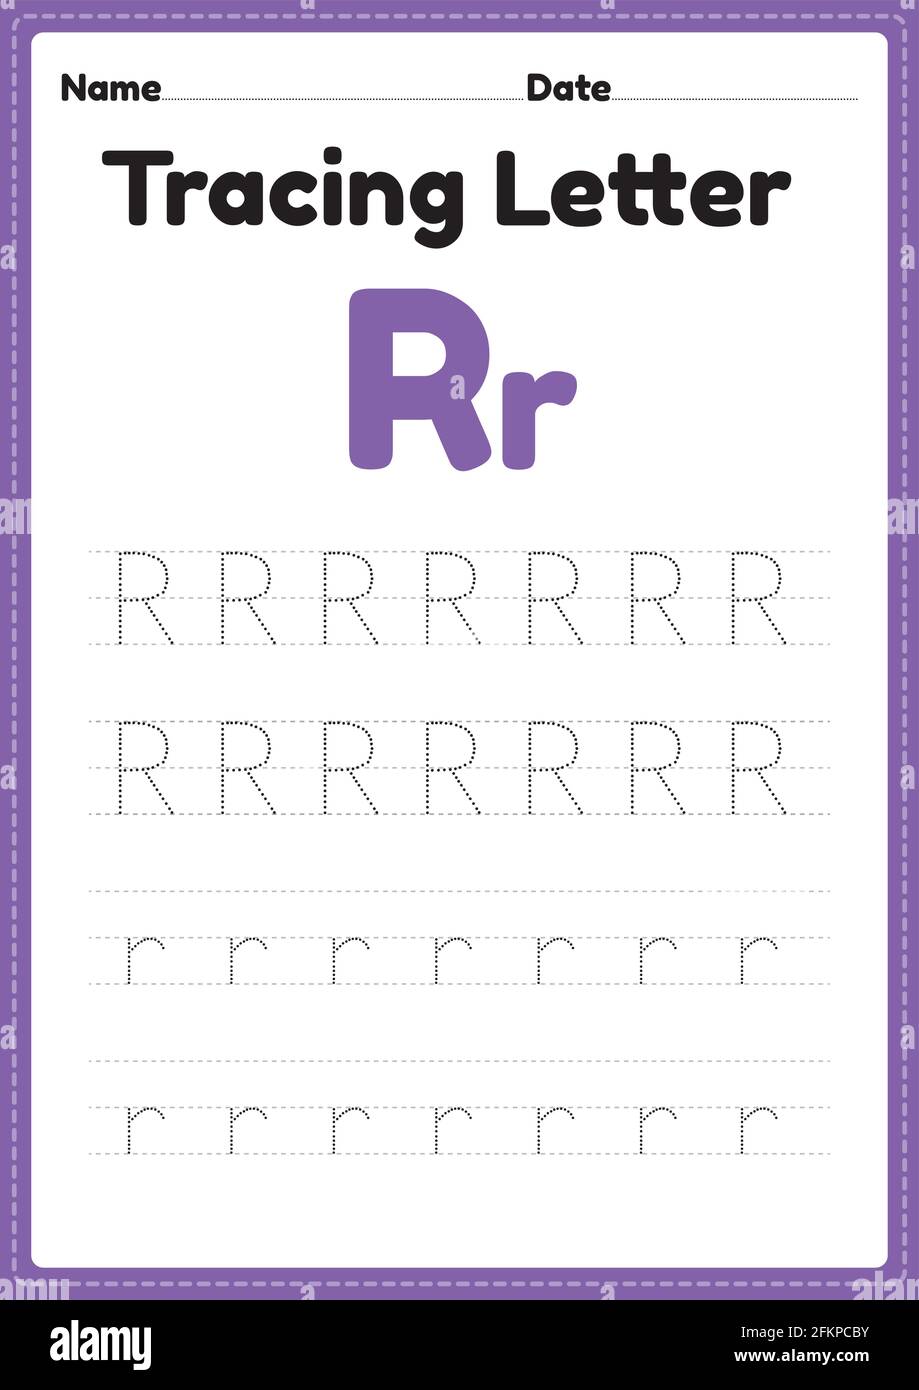 tracing letter r alphabet worksheet for kindergarten and preschool kids for handwriting practice and educational activities in a printable page illust stock vector image art alamy